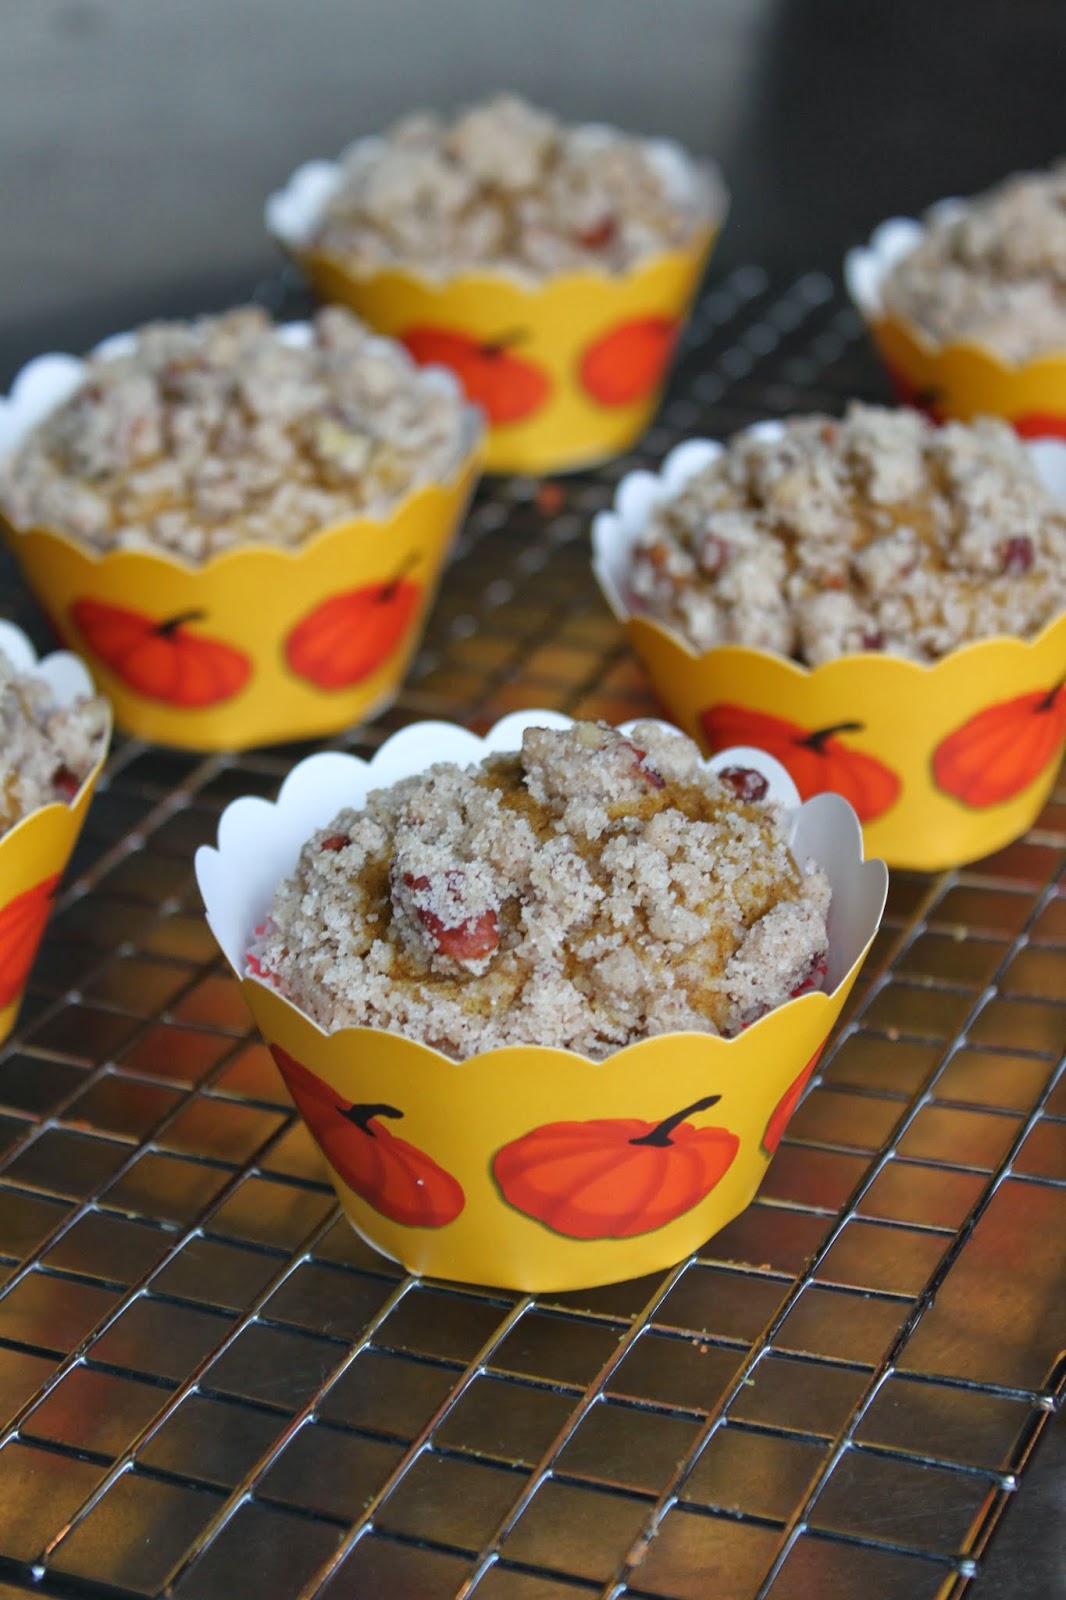 Baked Perfection: Pumpkin Muffins with Pecan Streusel Topping